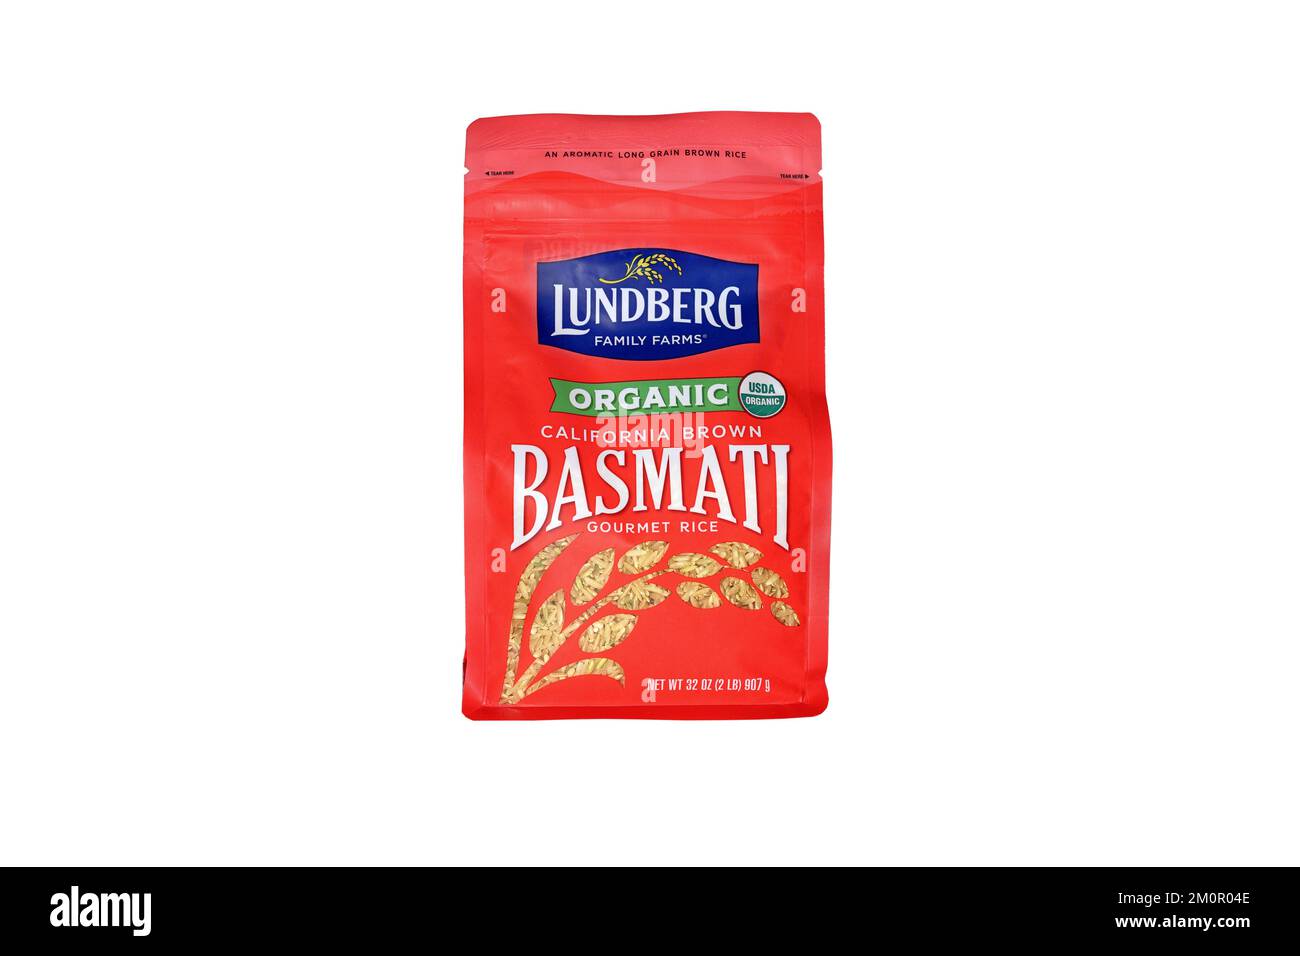 A bag of Lundberg Family Farms Organic California Brown Basmati Rice isolated on a white background. cutout image for illustration and editorial use. Stock Photo